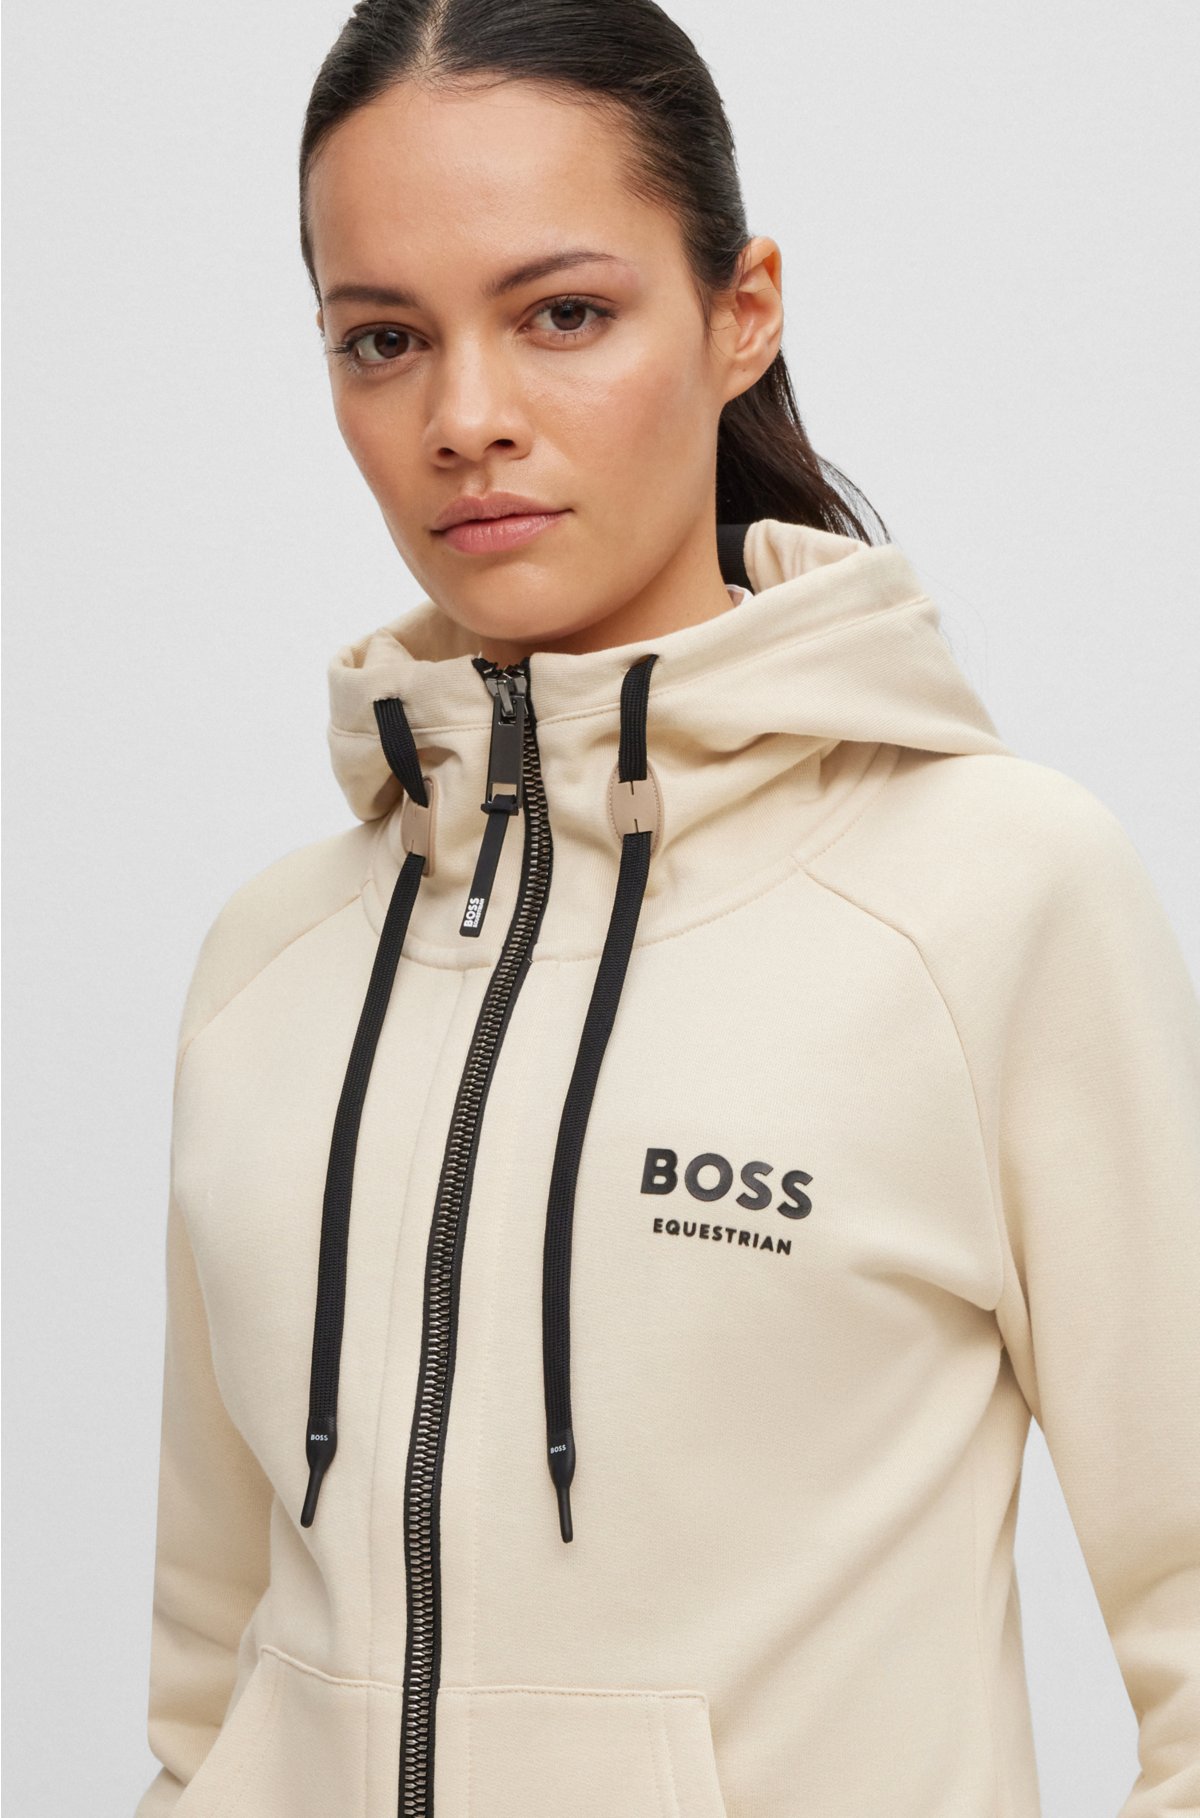 BOSS - Equestrian cotton zip-up hoodie with signature stripes